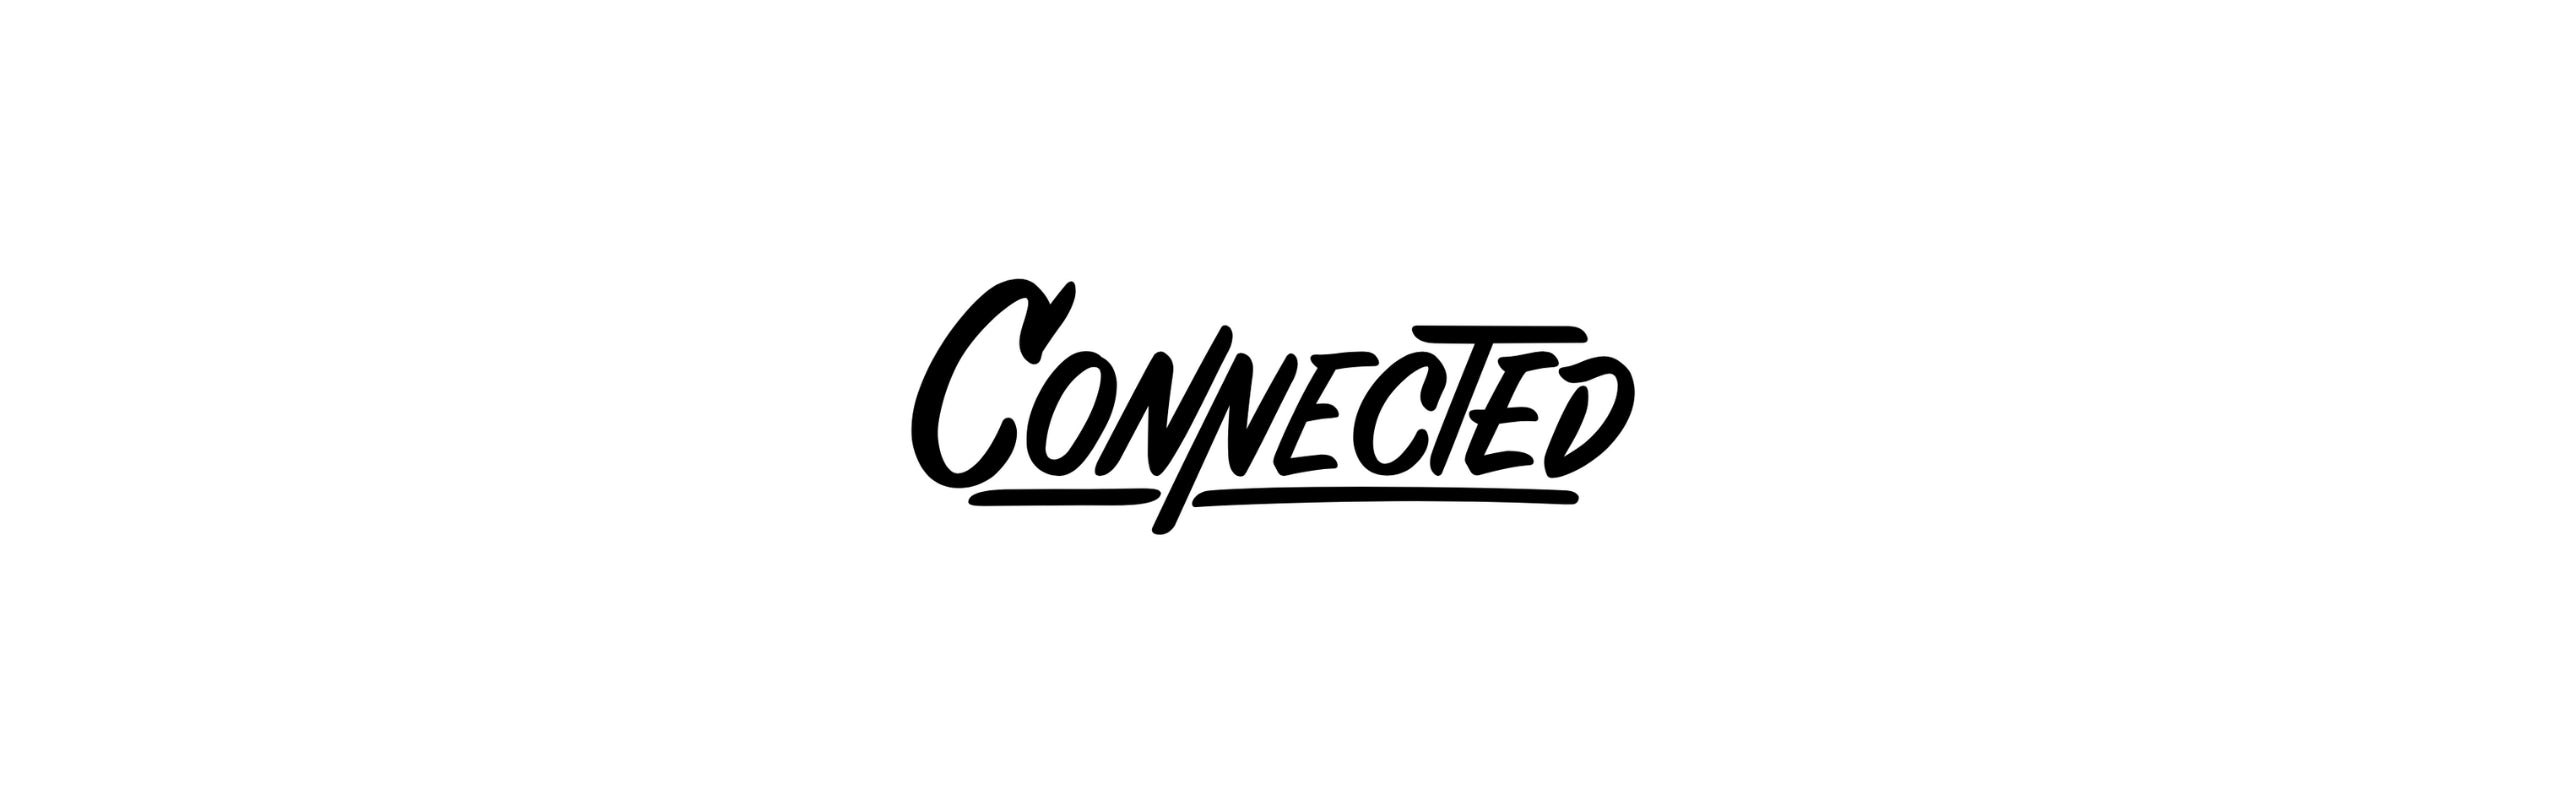 Connected Cannabis Co. Products | Weedmaps